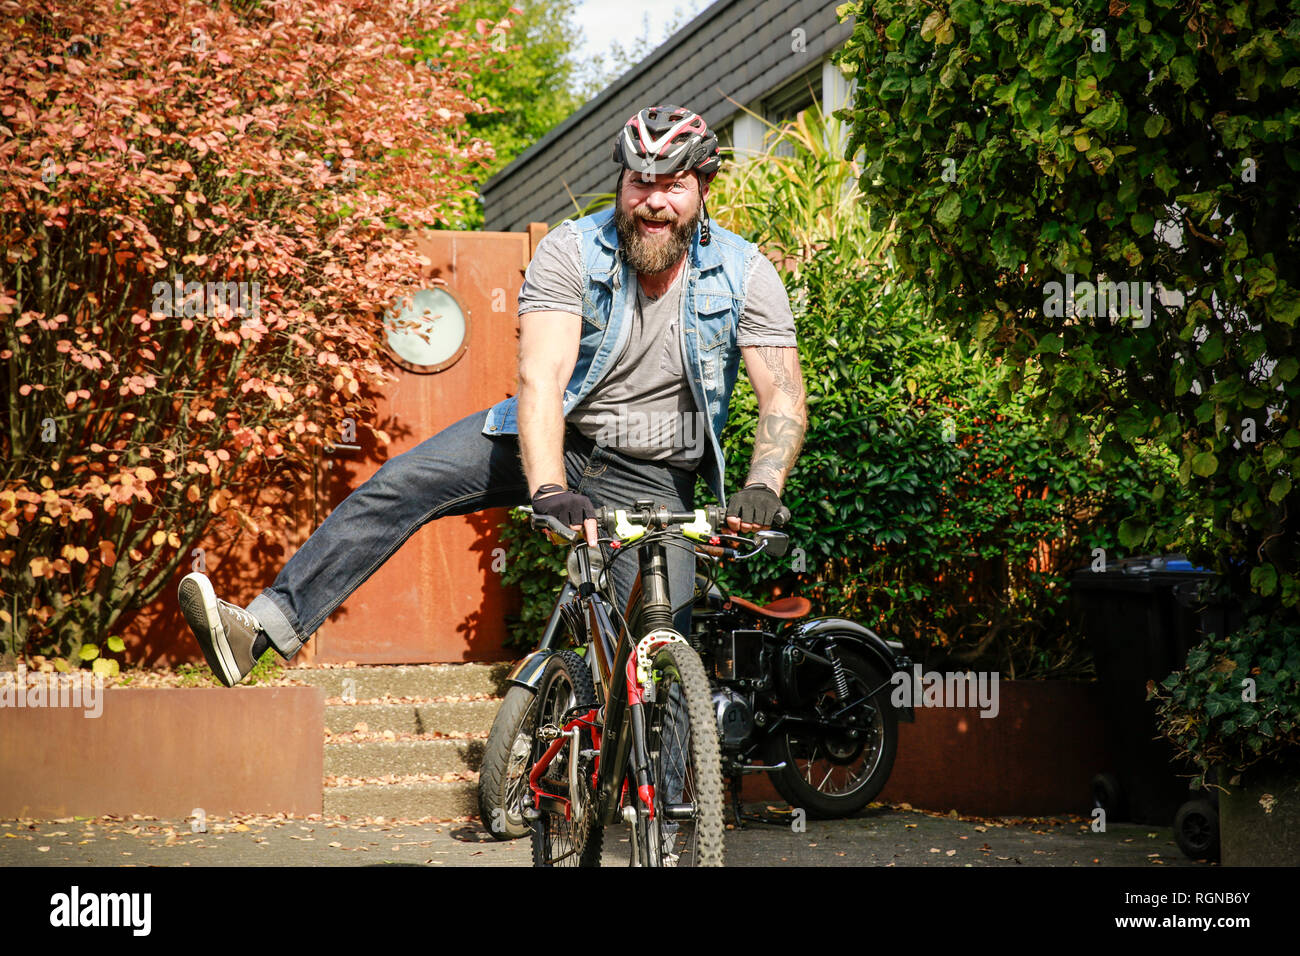 Portrait of happy man switching from motorbike to bicycle Stock Photo